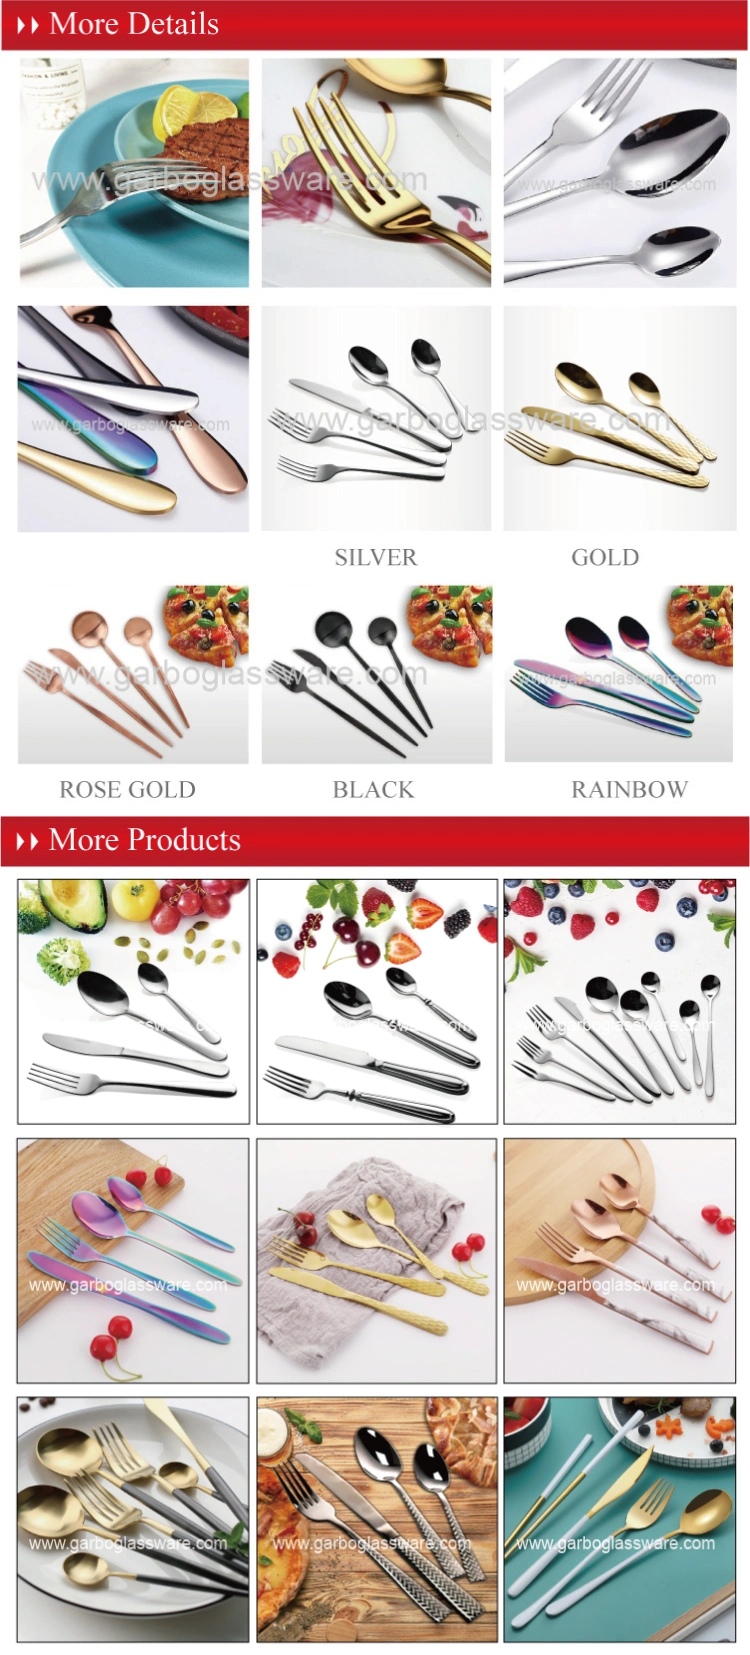 Home Use Food Grade Stainless Steel Spoon Set Dinner Spoon Sliverware Spoon Matte Finish Sm139